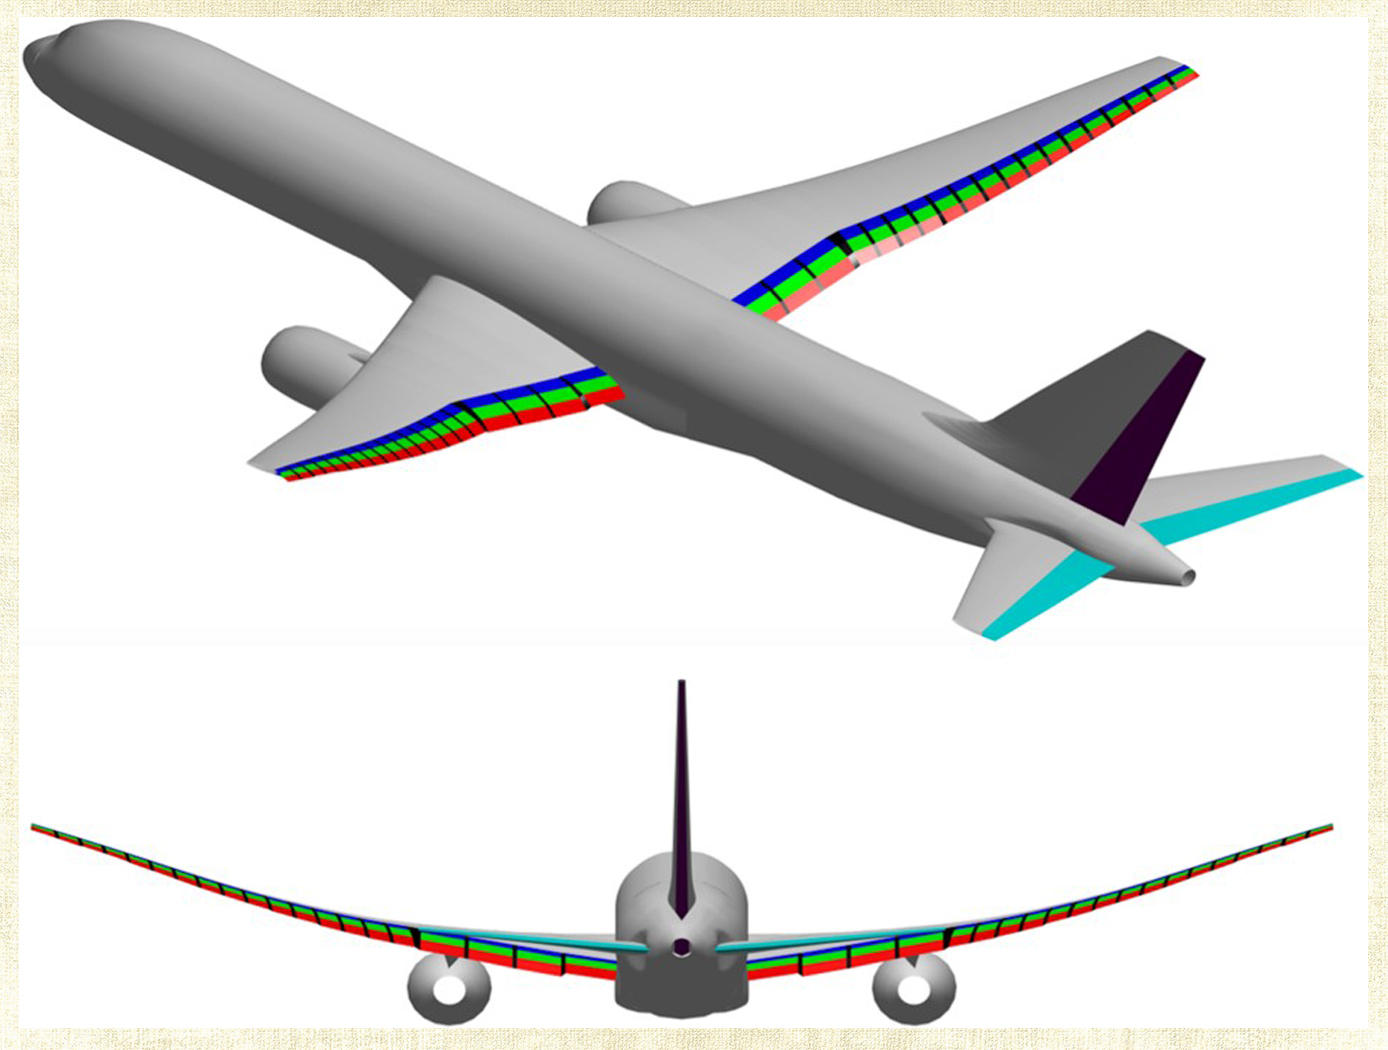 Flexible Wing Aircraft with Distributed Flight Control Surfaces